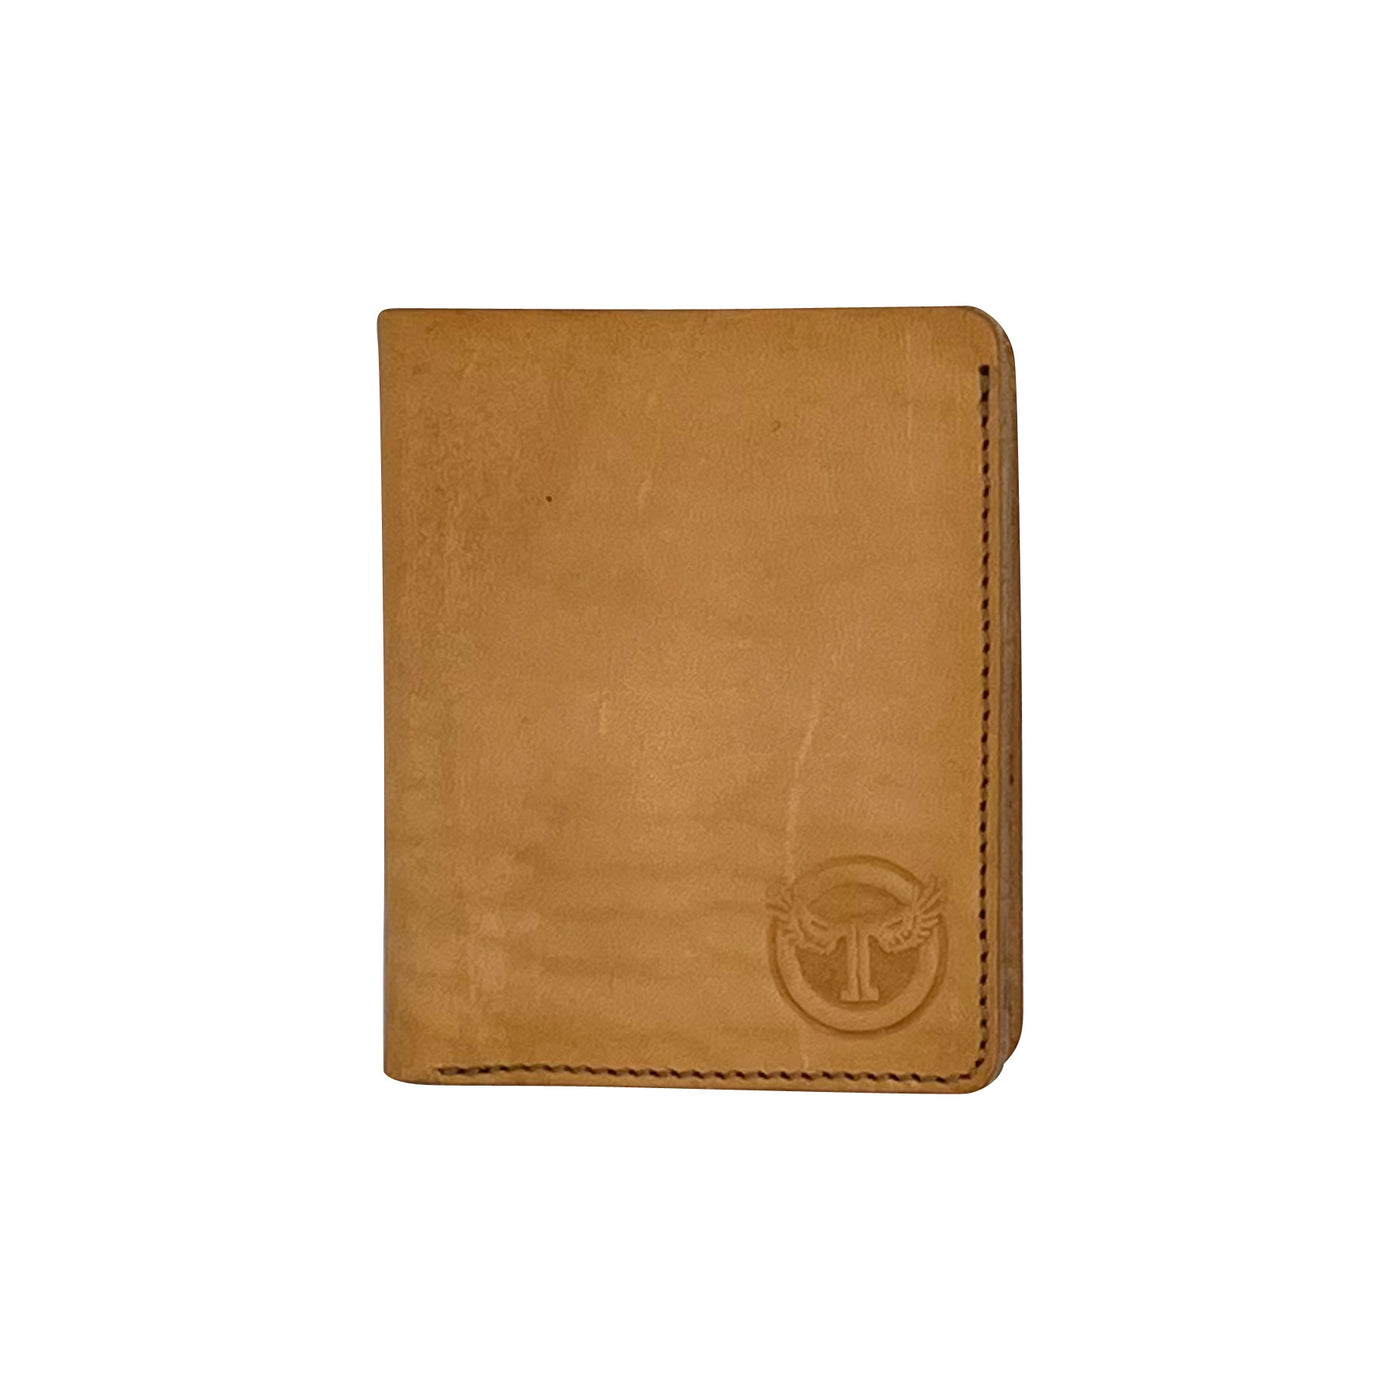 Thedi Leathers Portemonnaie Card Holder Natural